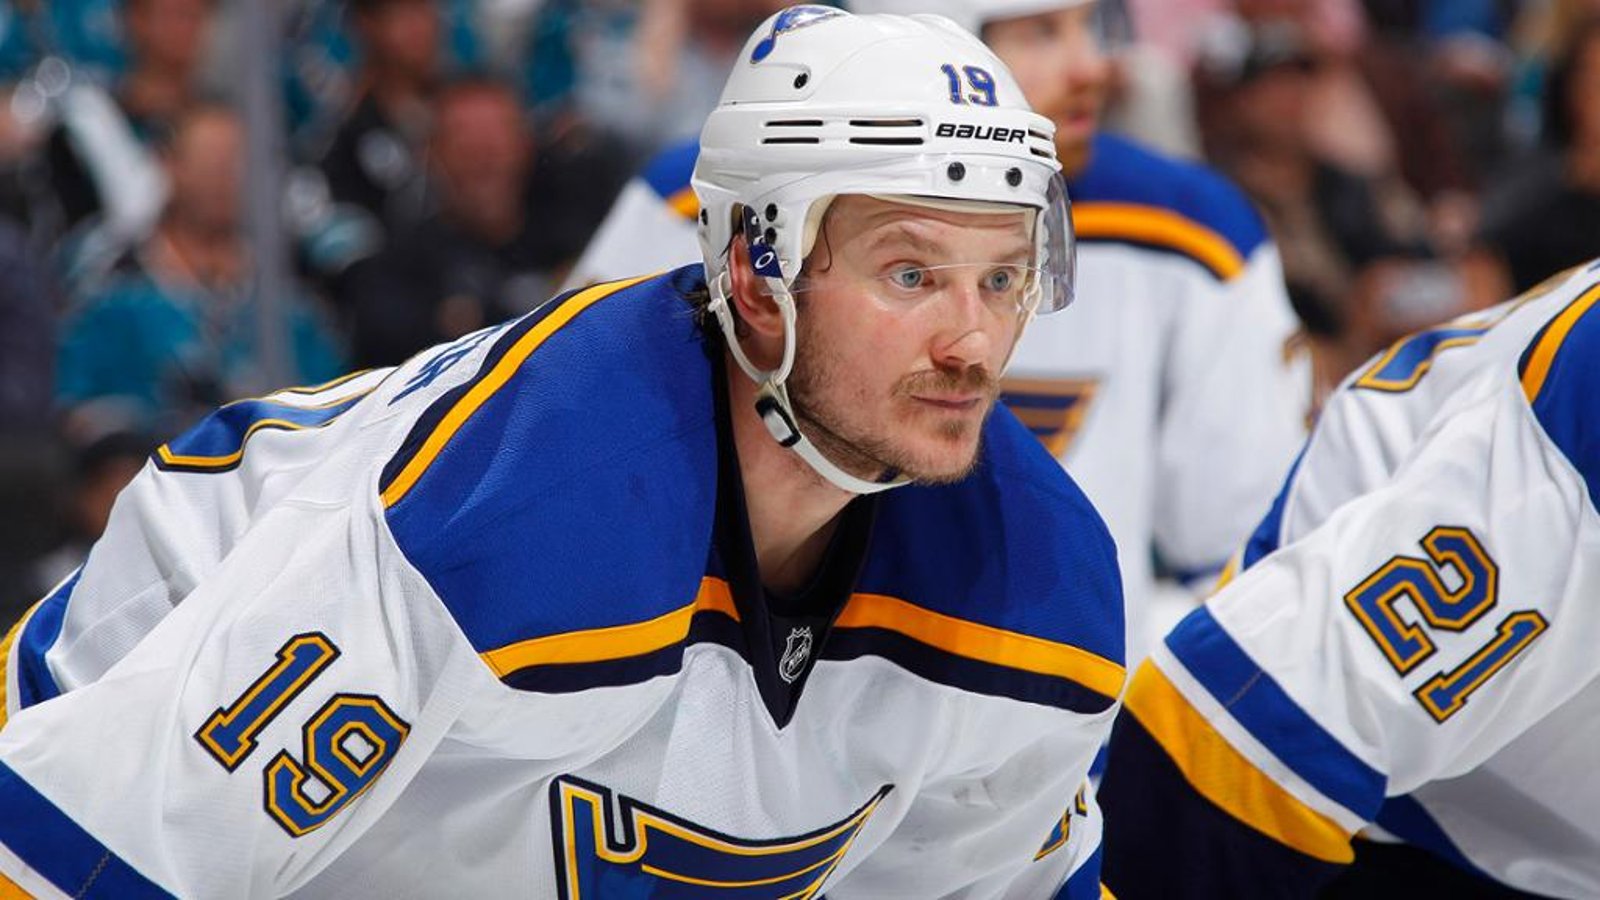 Jay Bouwmeester stuns media in press conference 